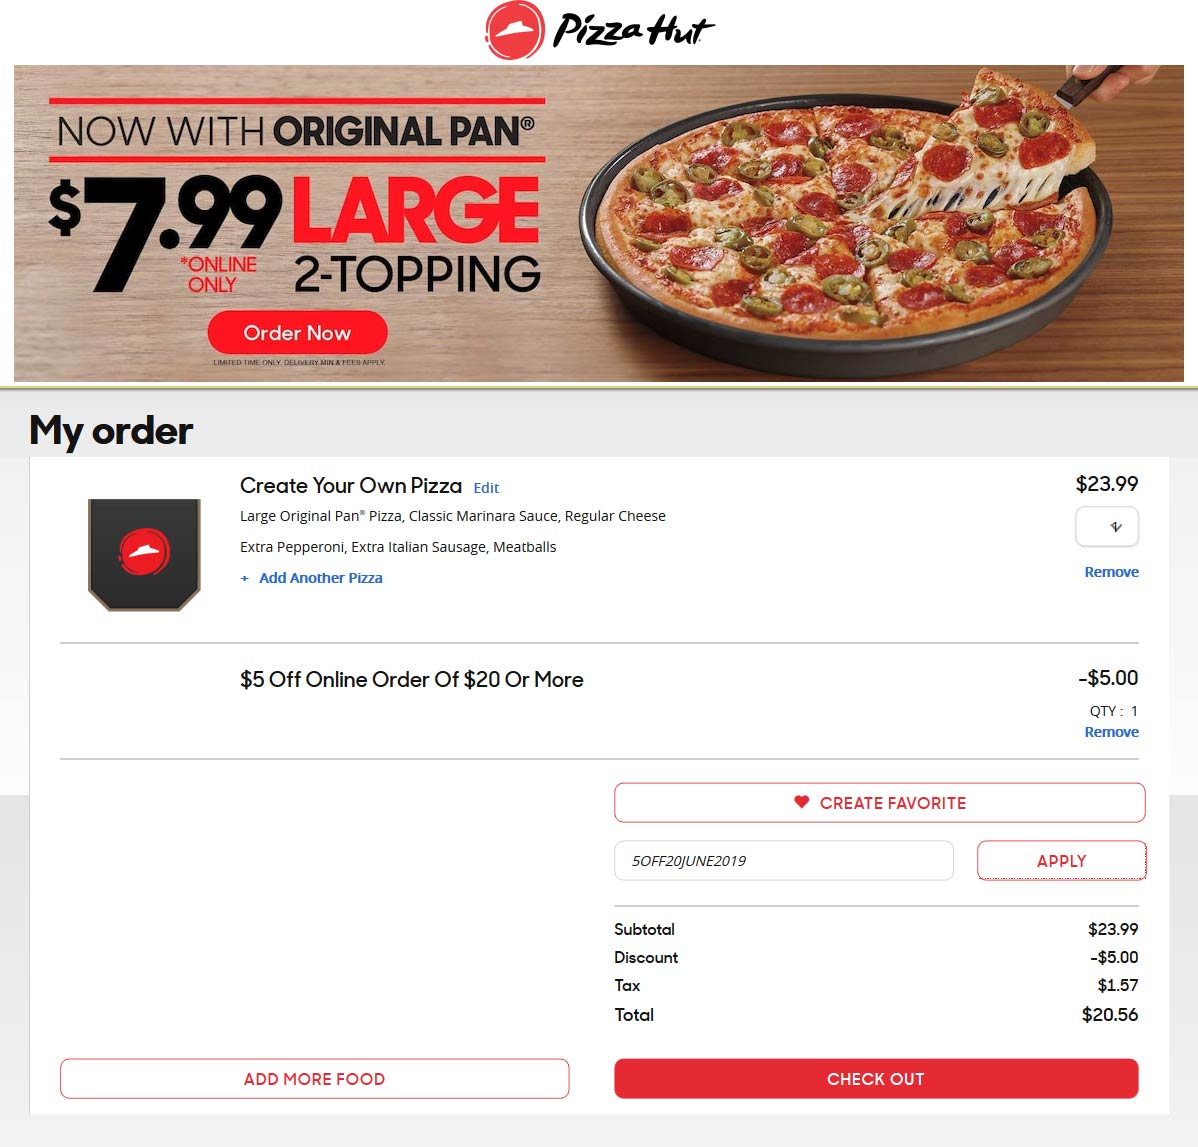 Pizza Hut coupons & promo code for [January 2022]